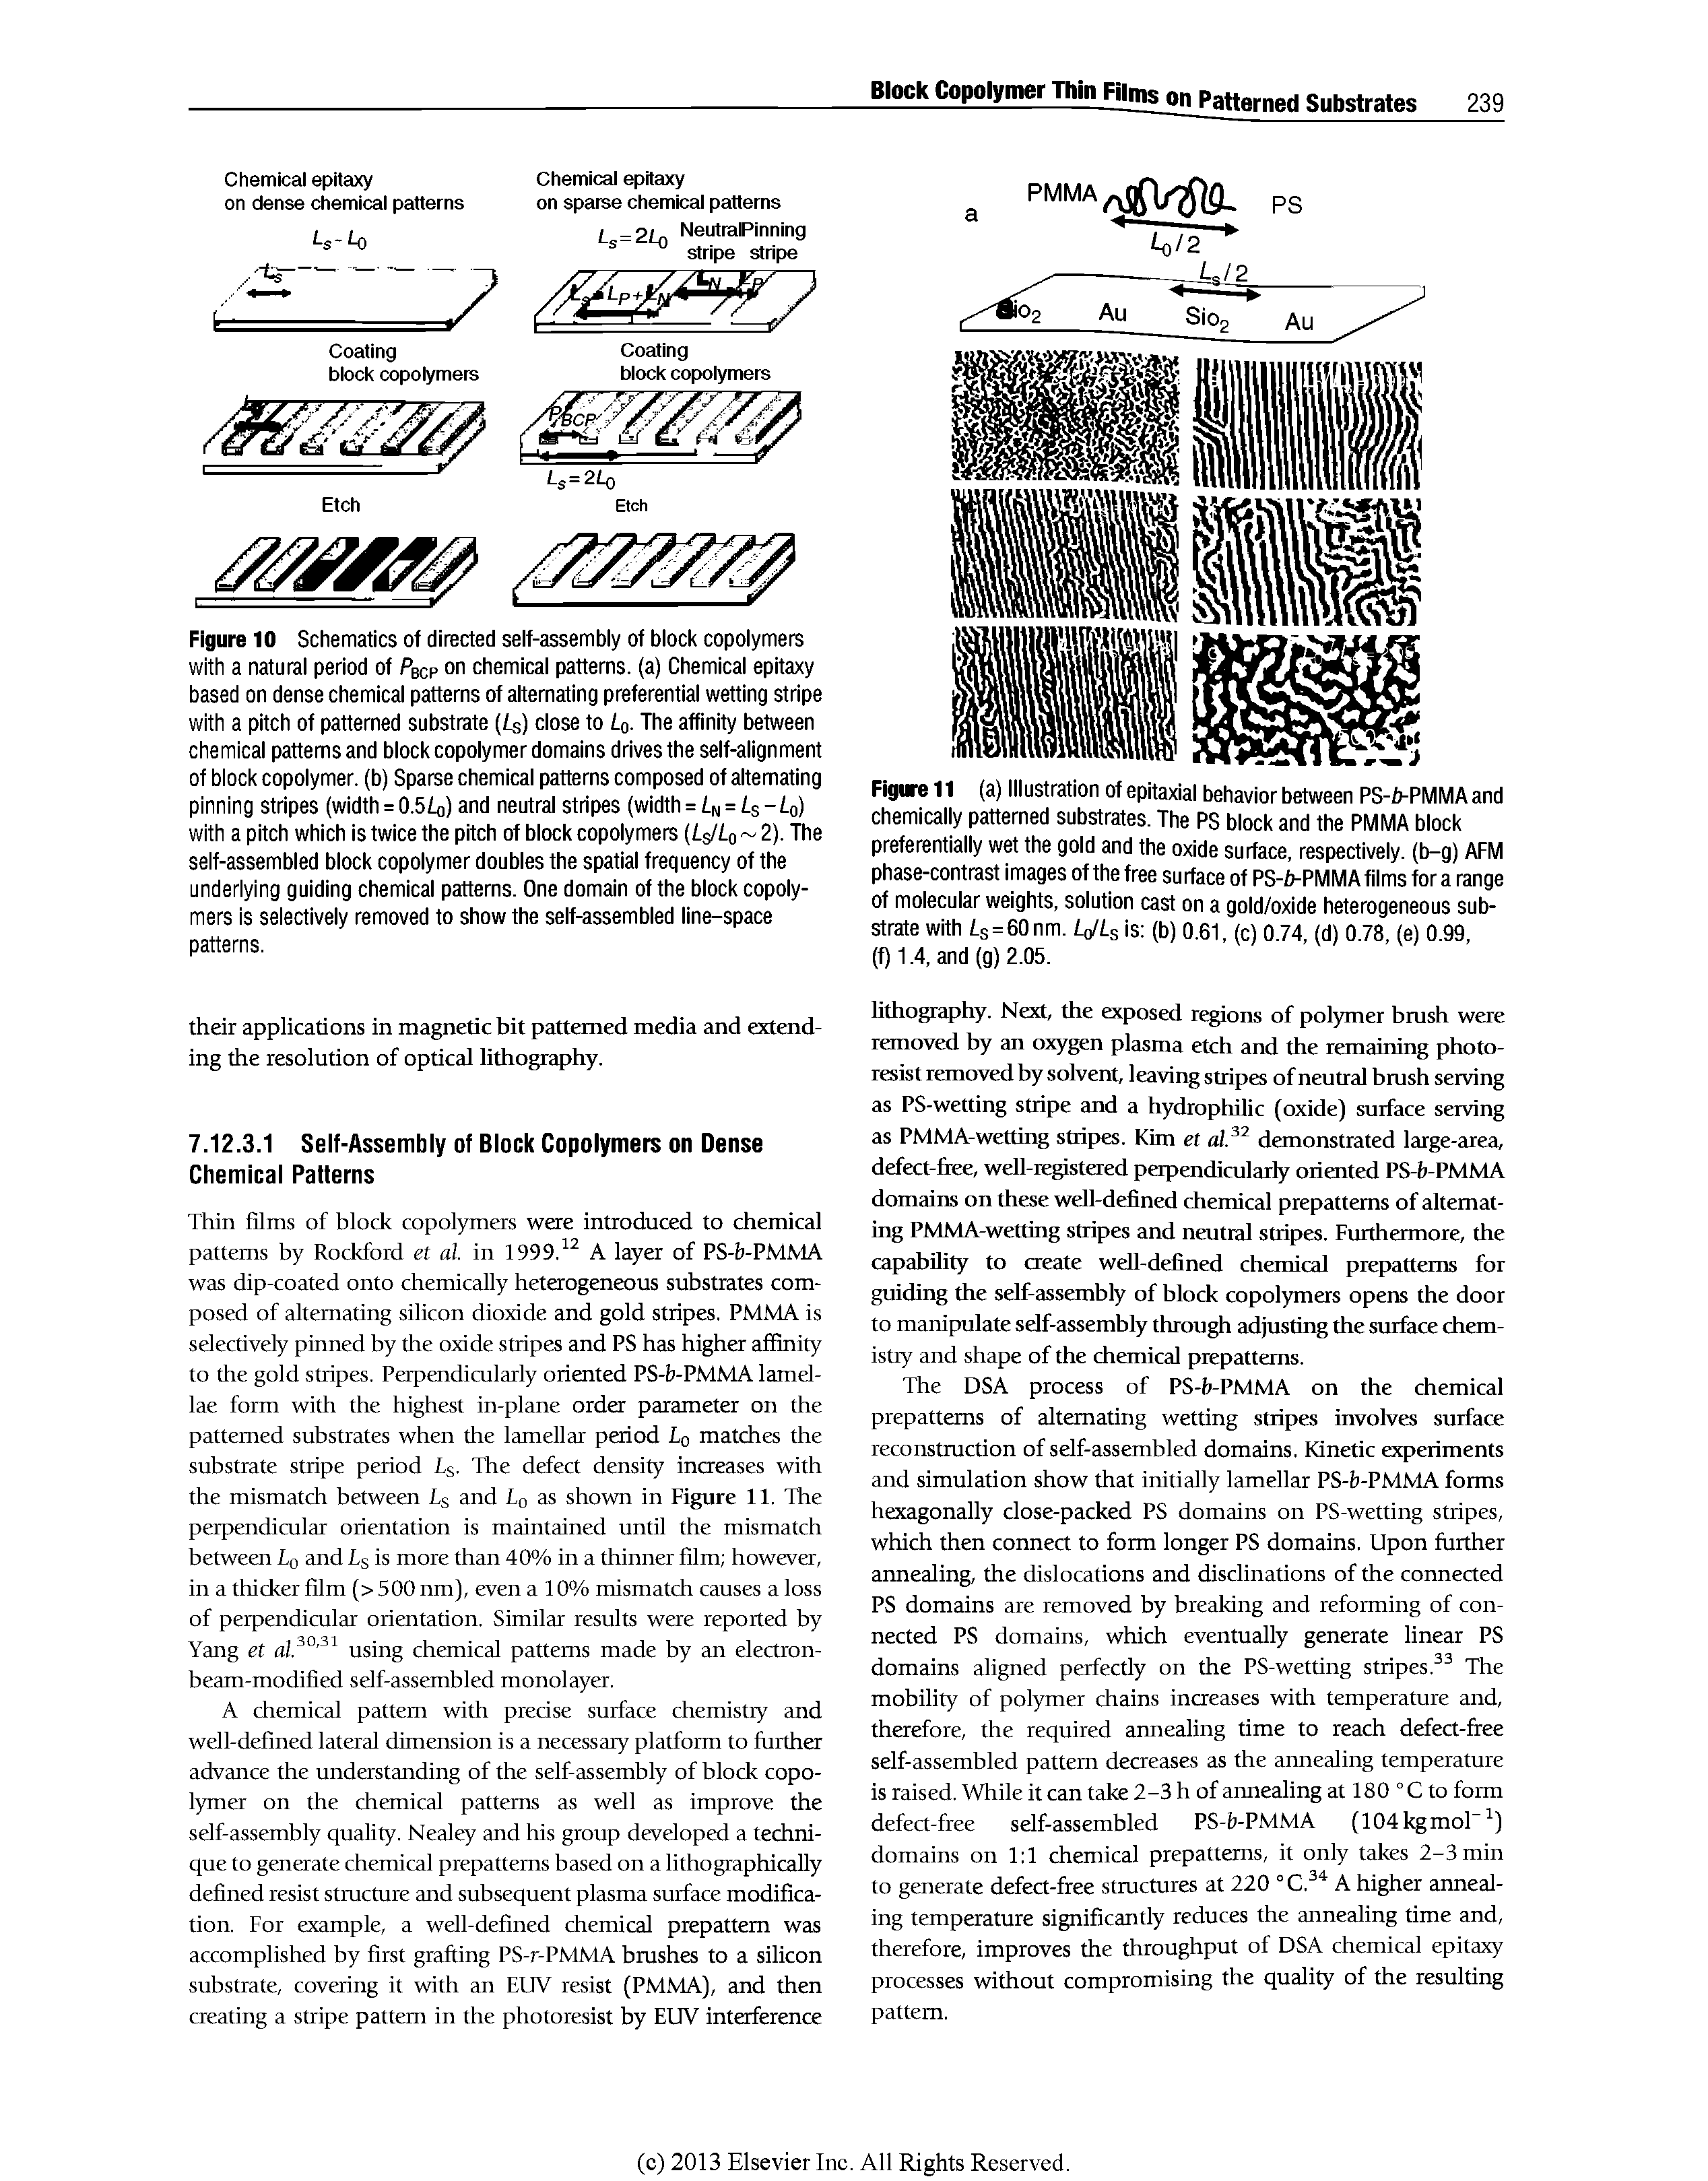 Figure 10 Schematics of directed self-assembly of block copolymers with a natural period of Pbcp on chemical patterns, (a) Chemical epitaxy based on dense chemical patterns of alternating preferential wetting stripe with a pitch of patterned substrate (Ls) close to Lo. The affinity between chemical patterns and block copolymer domains drives the self-alignment of block copolymer, (b) Sparse chemical patterns composed of alternating pinning stripes (width = 0.5io) and neutral stripes (width = Lk = Ls Lo) with a pitch which is twice the pitch of block copolymers (Ls/Lo 2). The self-assembled block copolymer doubles the spatial frequency of the underlying guiding chemical patterns. One domain of the block copolymers is selectively removed to show the self-assembled line-space patterns.